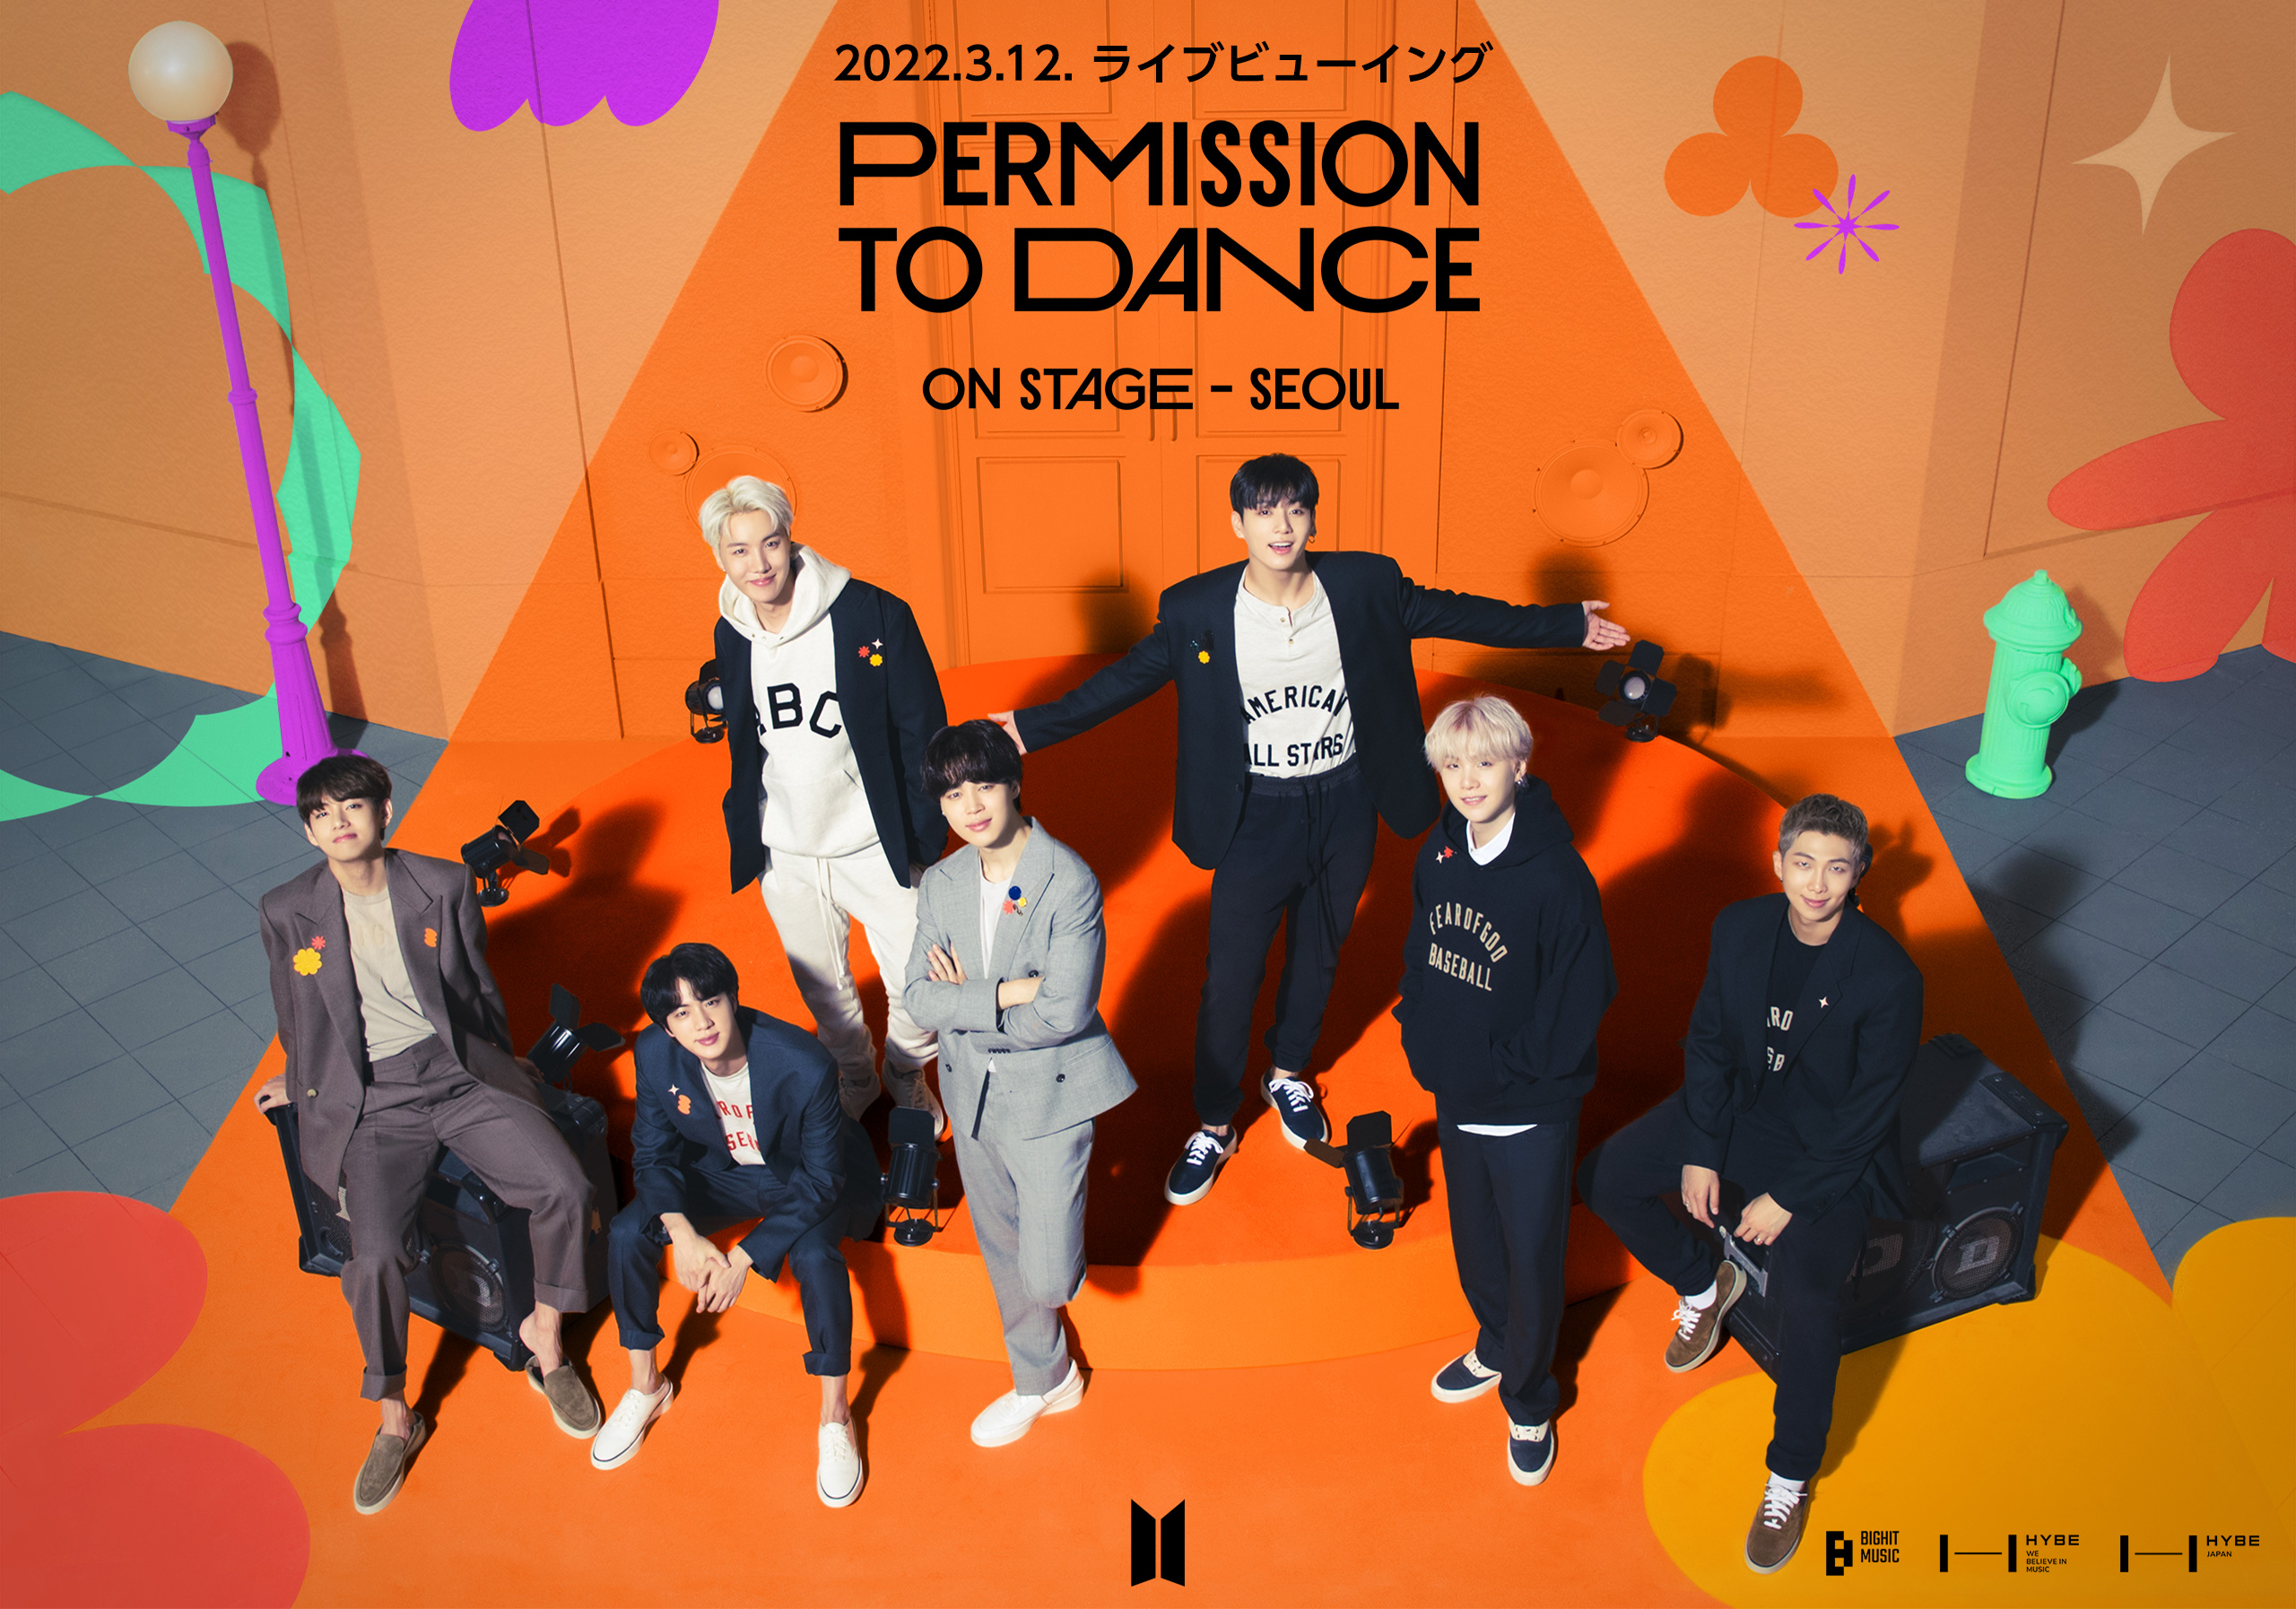 「BTS PERMISSION TO DANCE ON STAGE - SEOUL: LIVE VIEWING」公式サイト